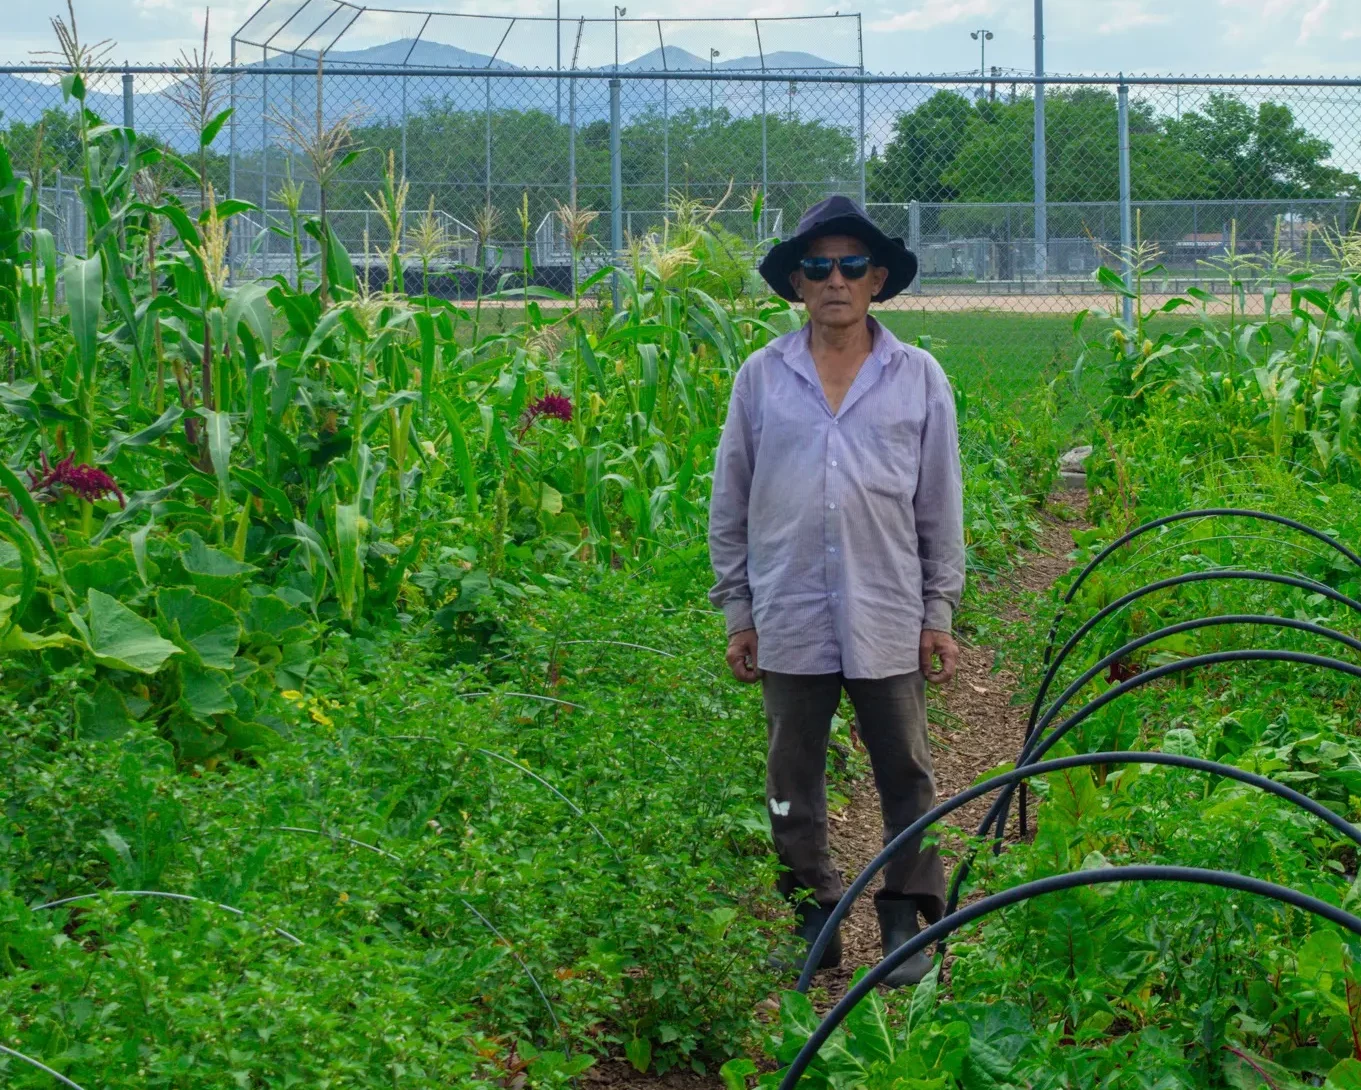 New Roots farmer Harka Mangar stands next to his plot of vegetables at Redwood Farm.